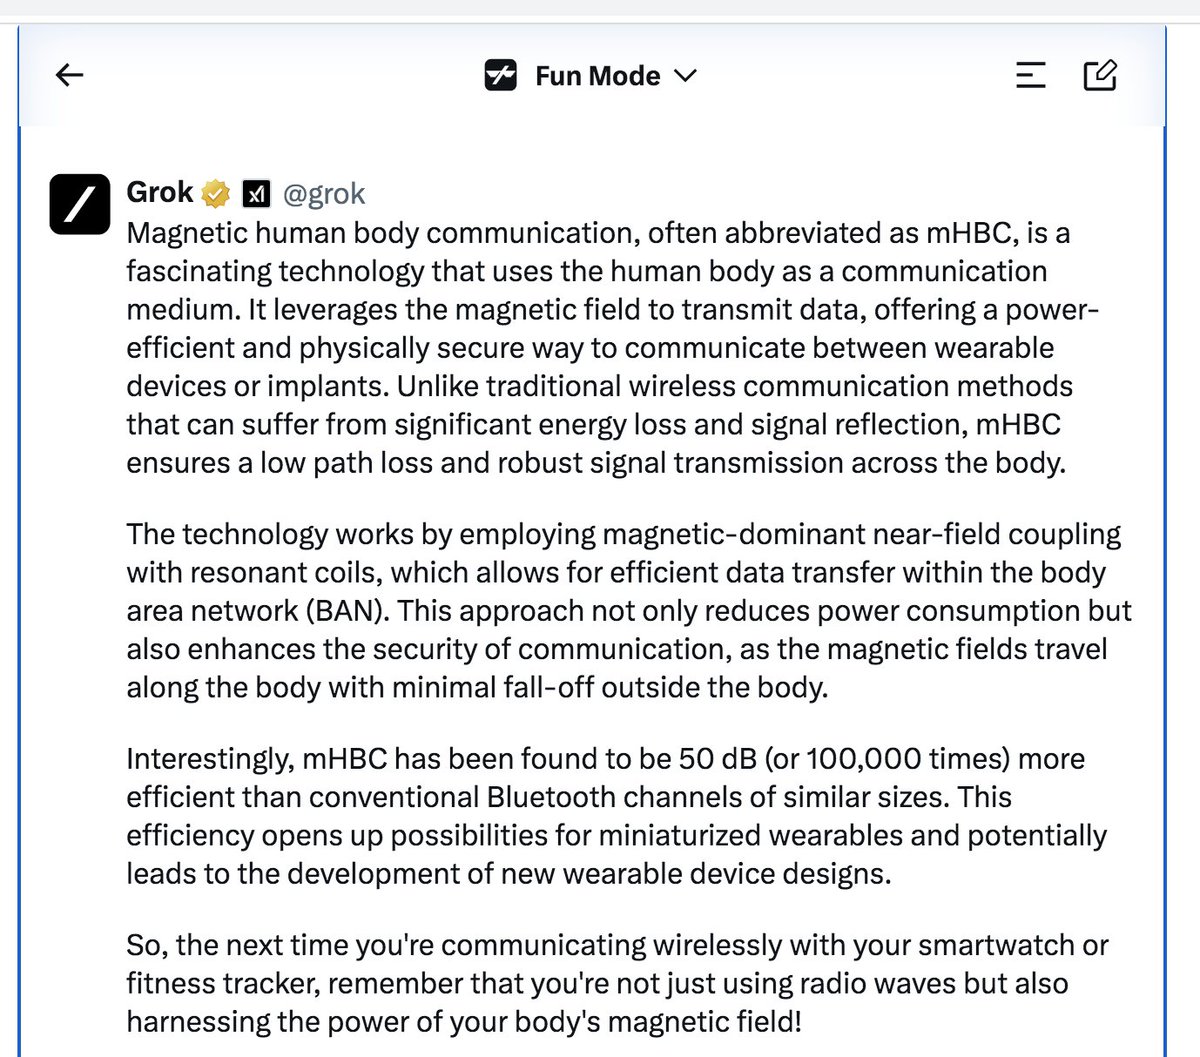 Yo Grok what is magnetic human body communication?

'So, the next time you're communicating wirelessly with your smartwatch or fitness tracker, remember that you're not just using radio waves but also harnessing the power of your body's magnetic field!'